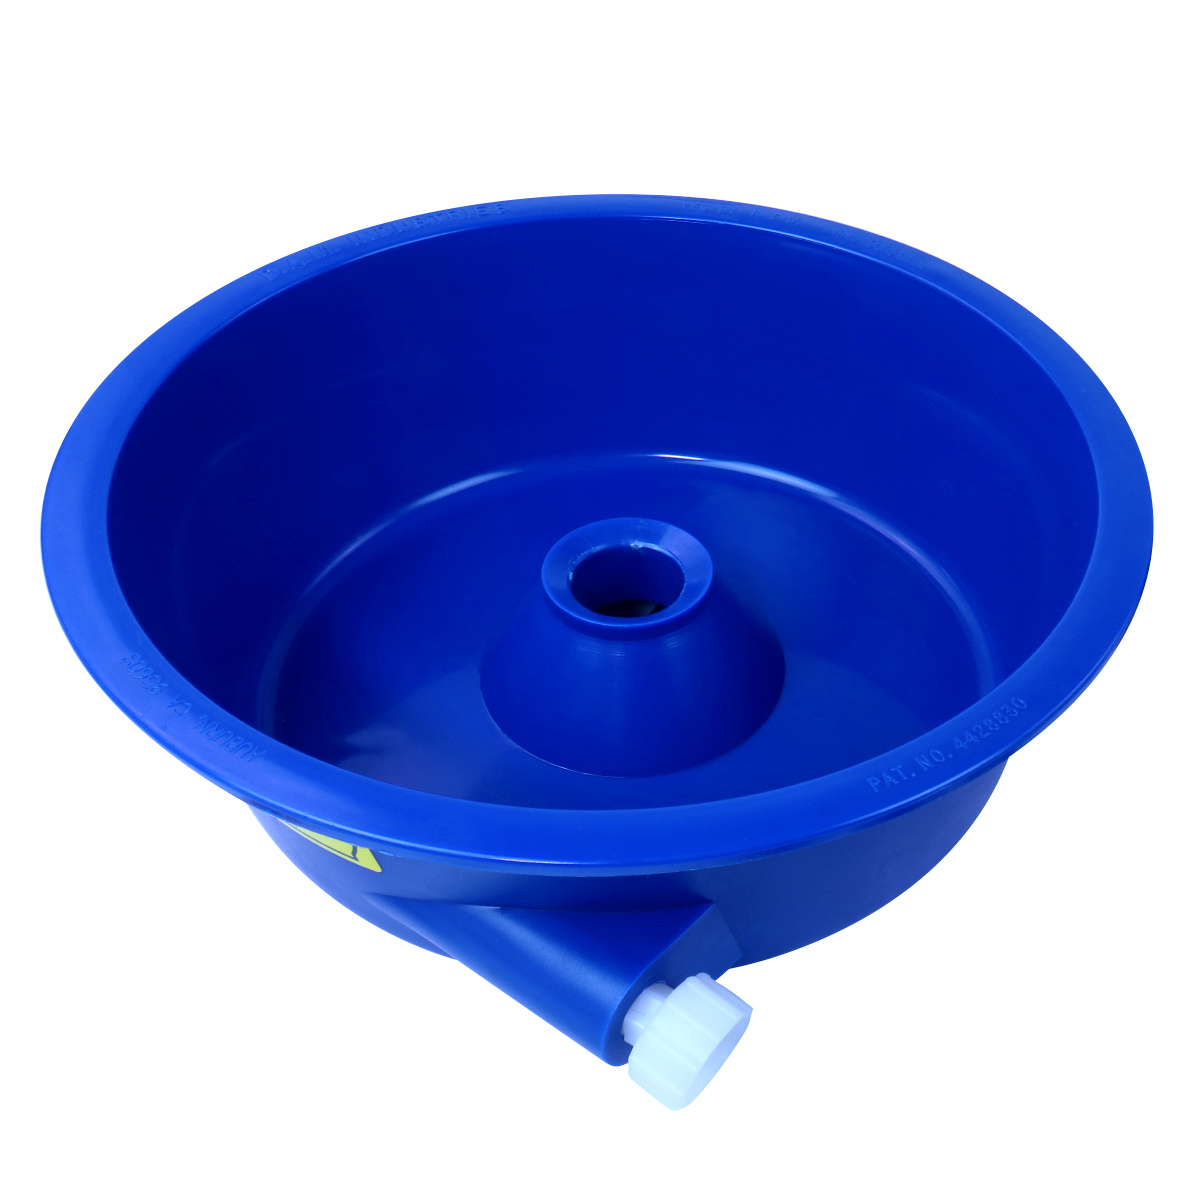 Blue Bowl Concentrator Bowl Only